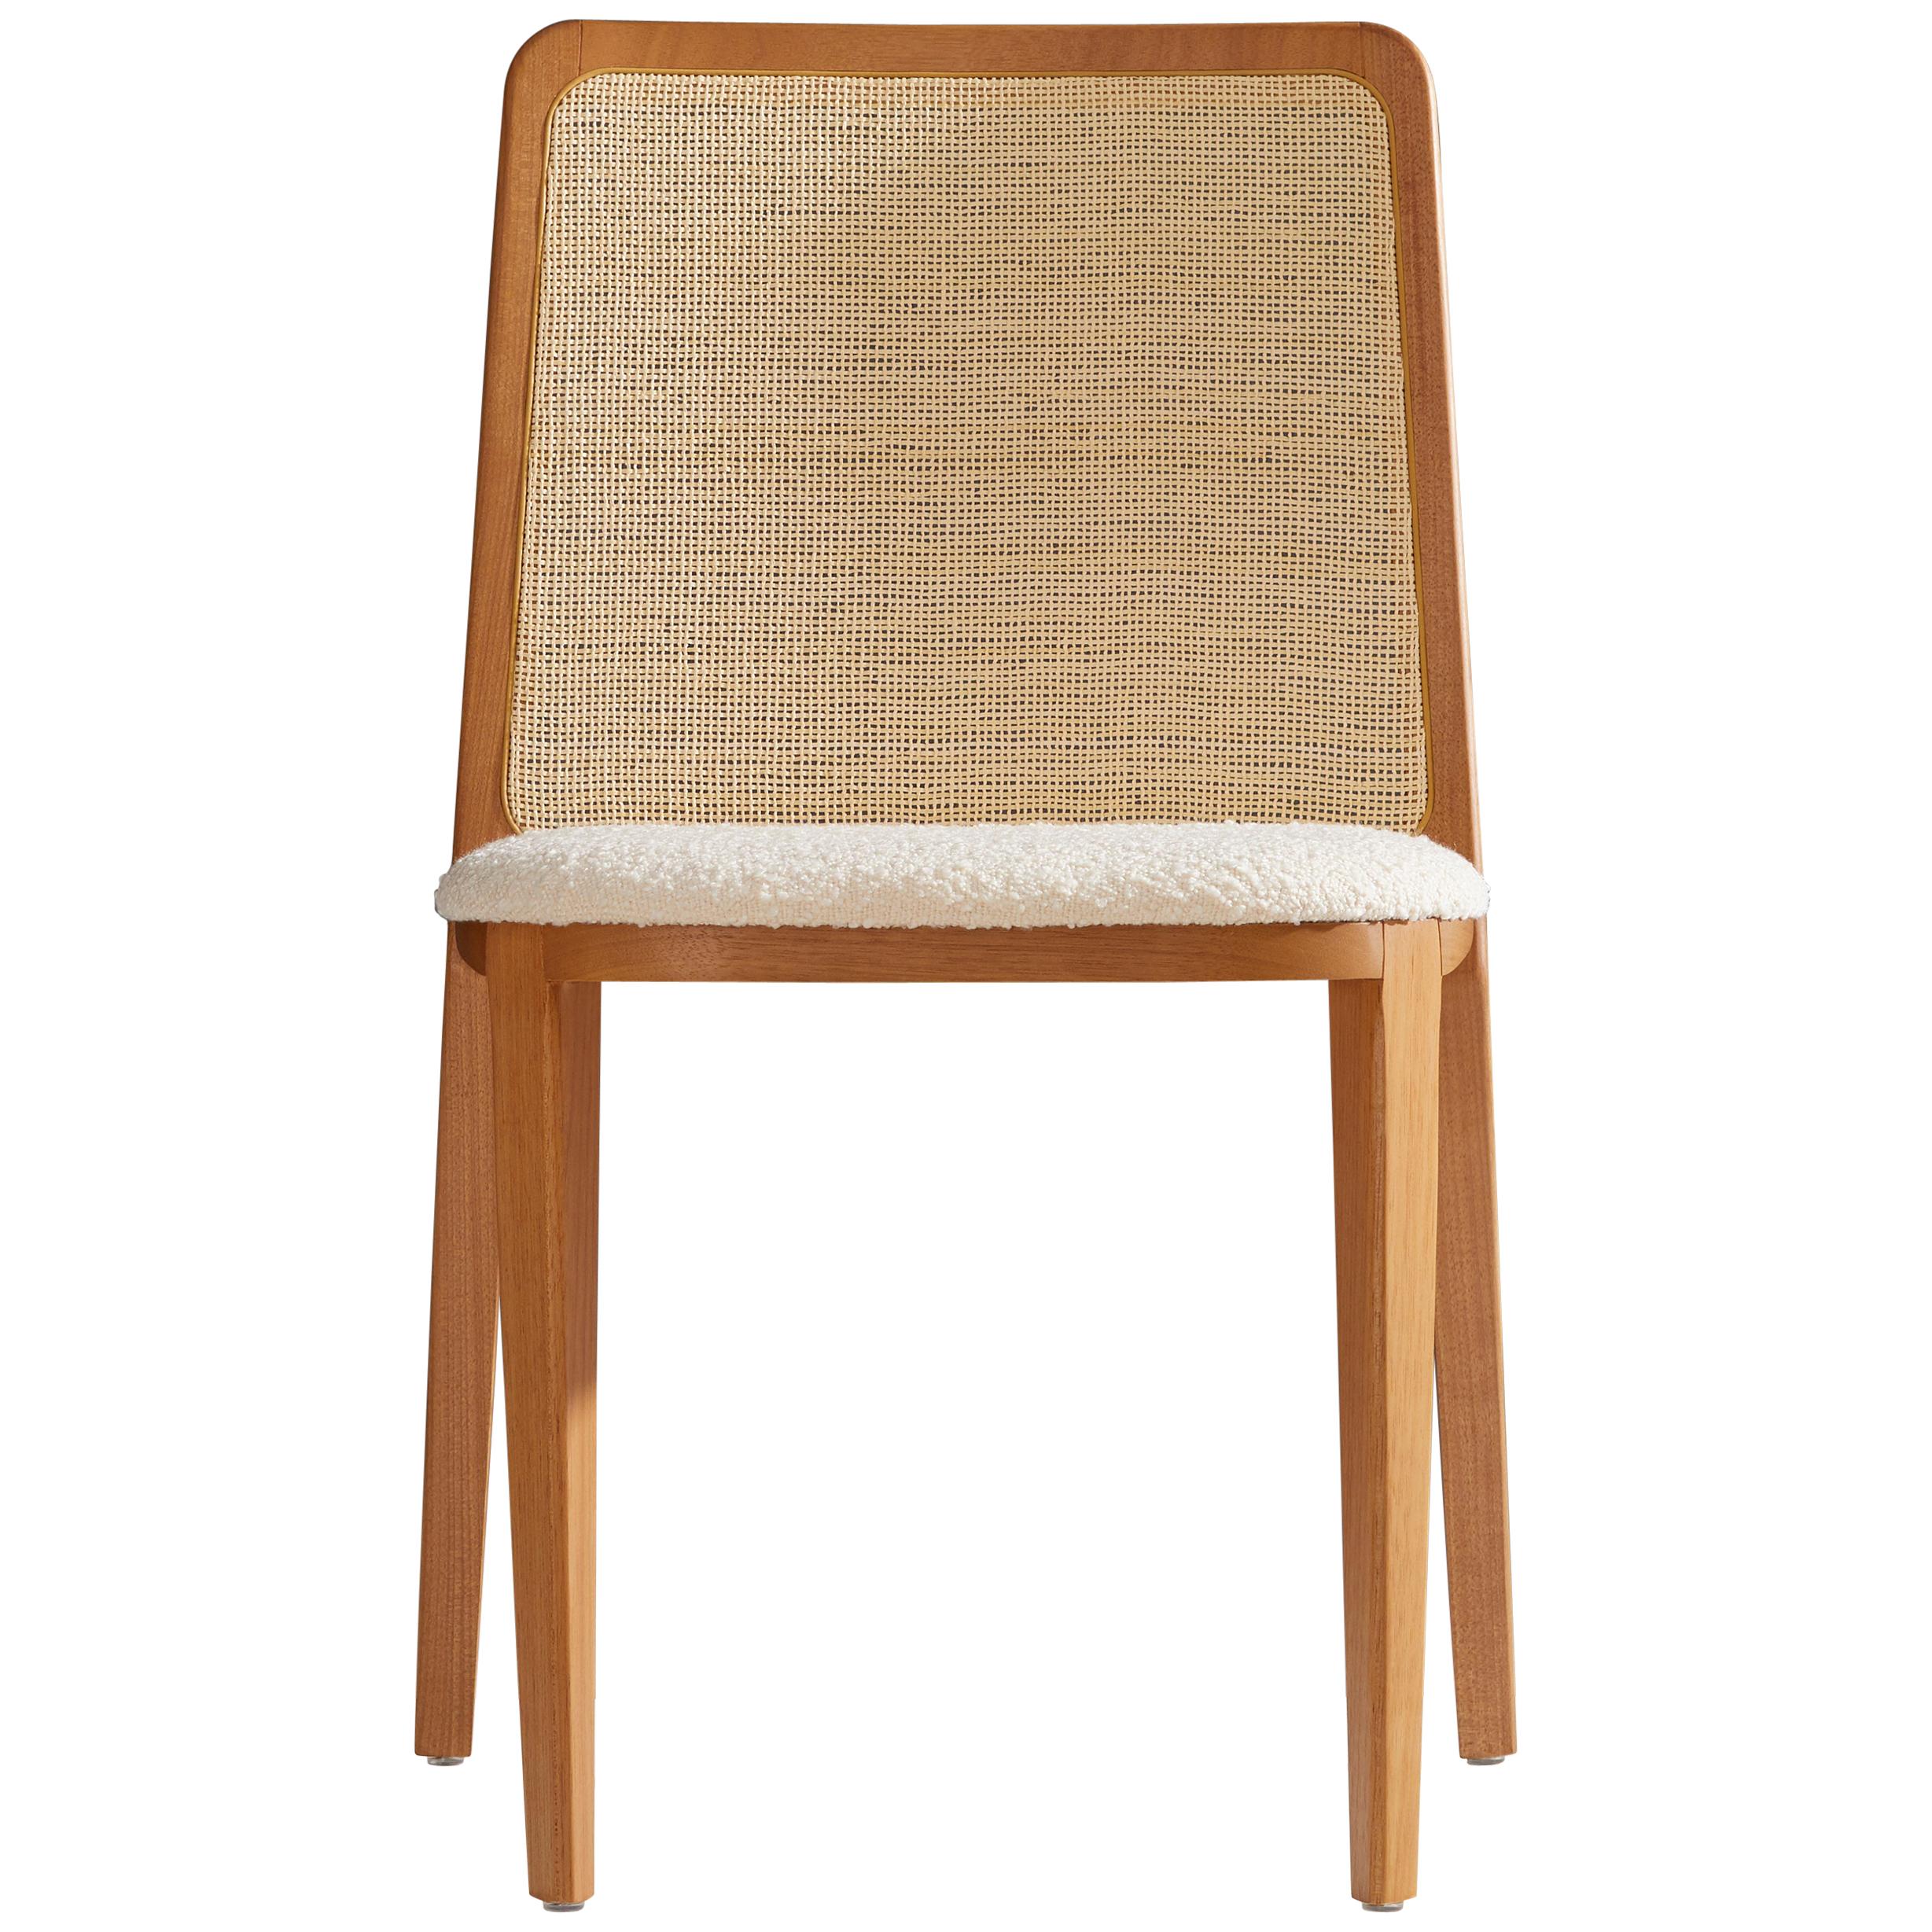 Minimal Style, Solid Wood Chair, Special Textile Seating, Caning Backboard